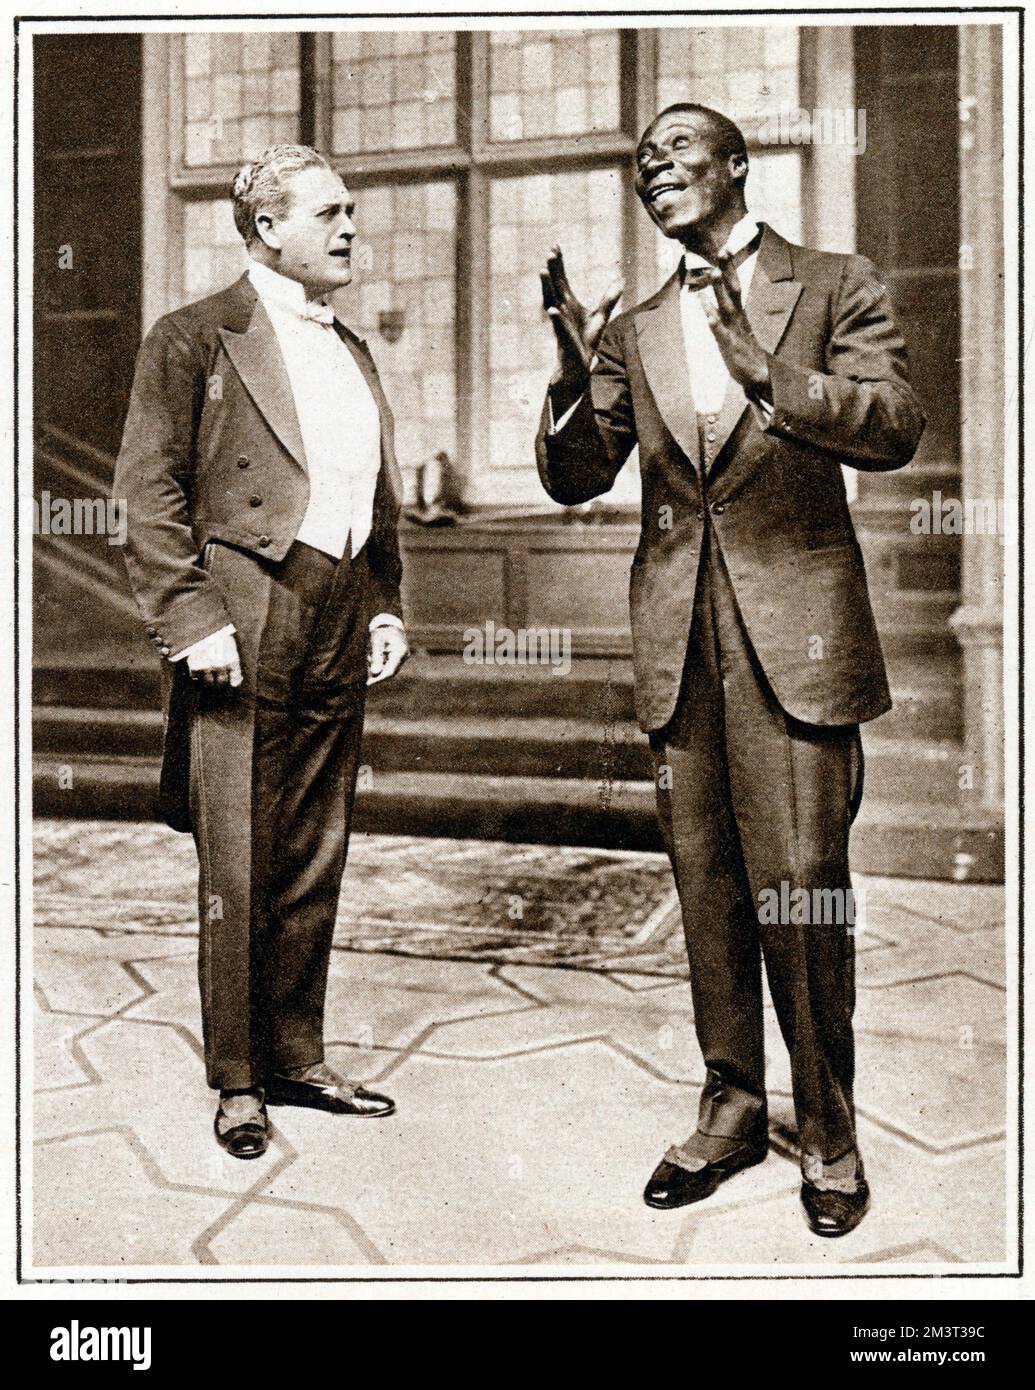 'The Dippers' at the Criterion - a farce by Ben Travers - Mr Ernest Trimmingham (1880 - 1942) is the leader of the band playing for the Dippers. Here he is showing Mr Cyril Maude (in the role of Mr Henry Talboyes) how how to get the hang of syncopated technique. Trimmingham was an actor on stage and screen from the British Overseas Territory of Bermuda. He was one of the first black actors in British cinema.     Date: 1922 Stock Photo